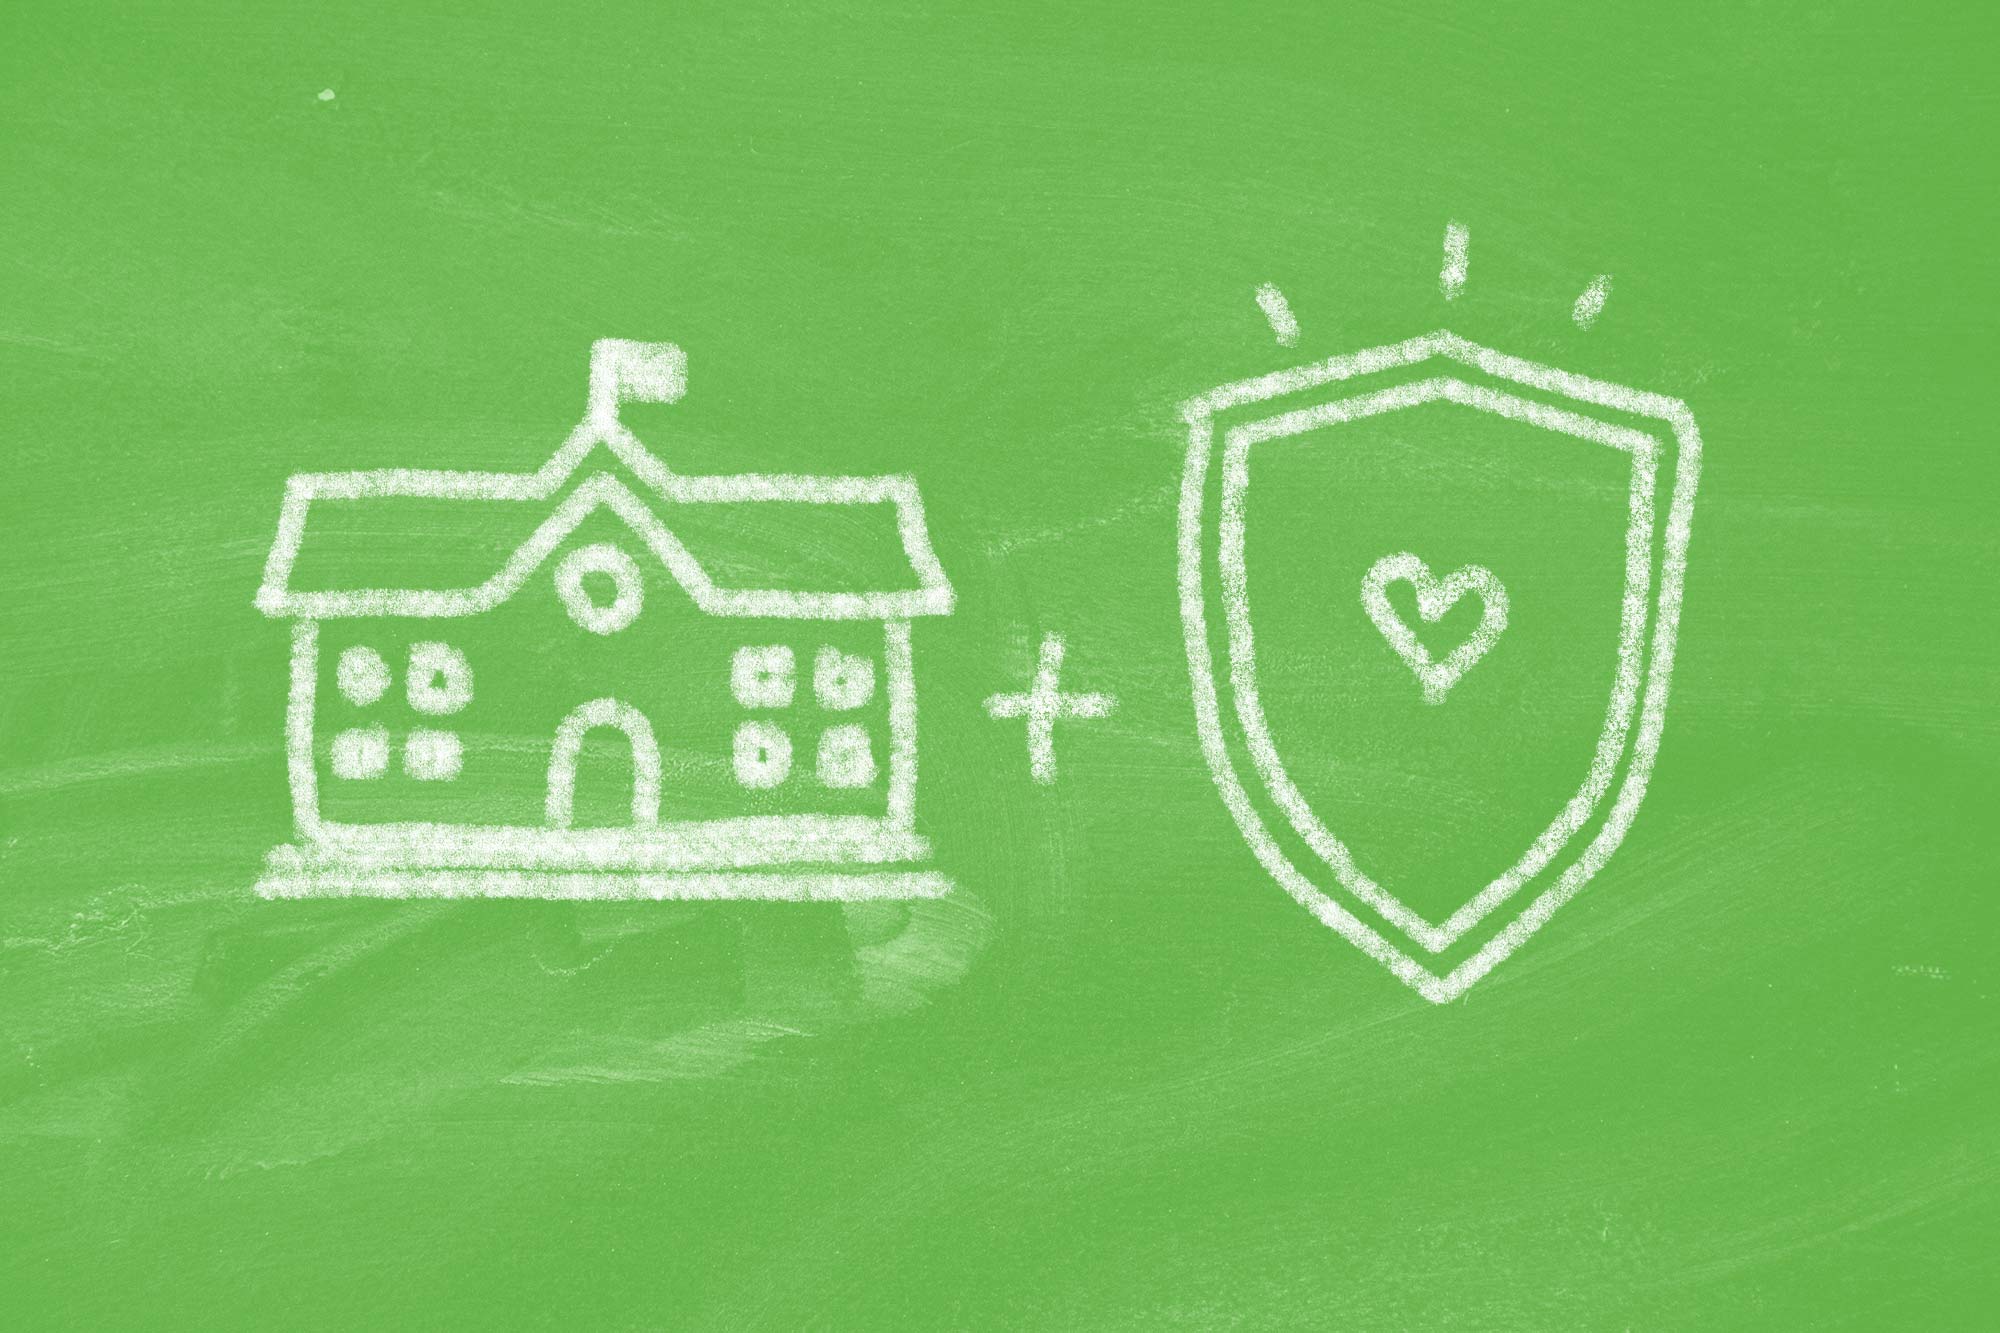 Illustration in the style of chalk on a blackboard of a school building plus a shield